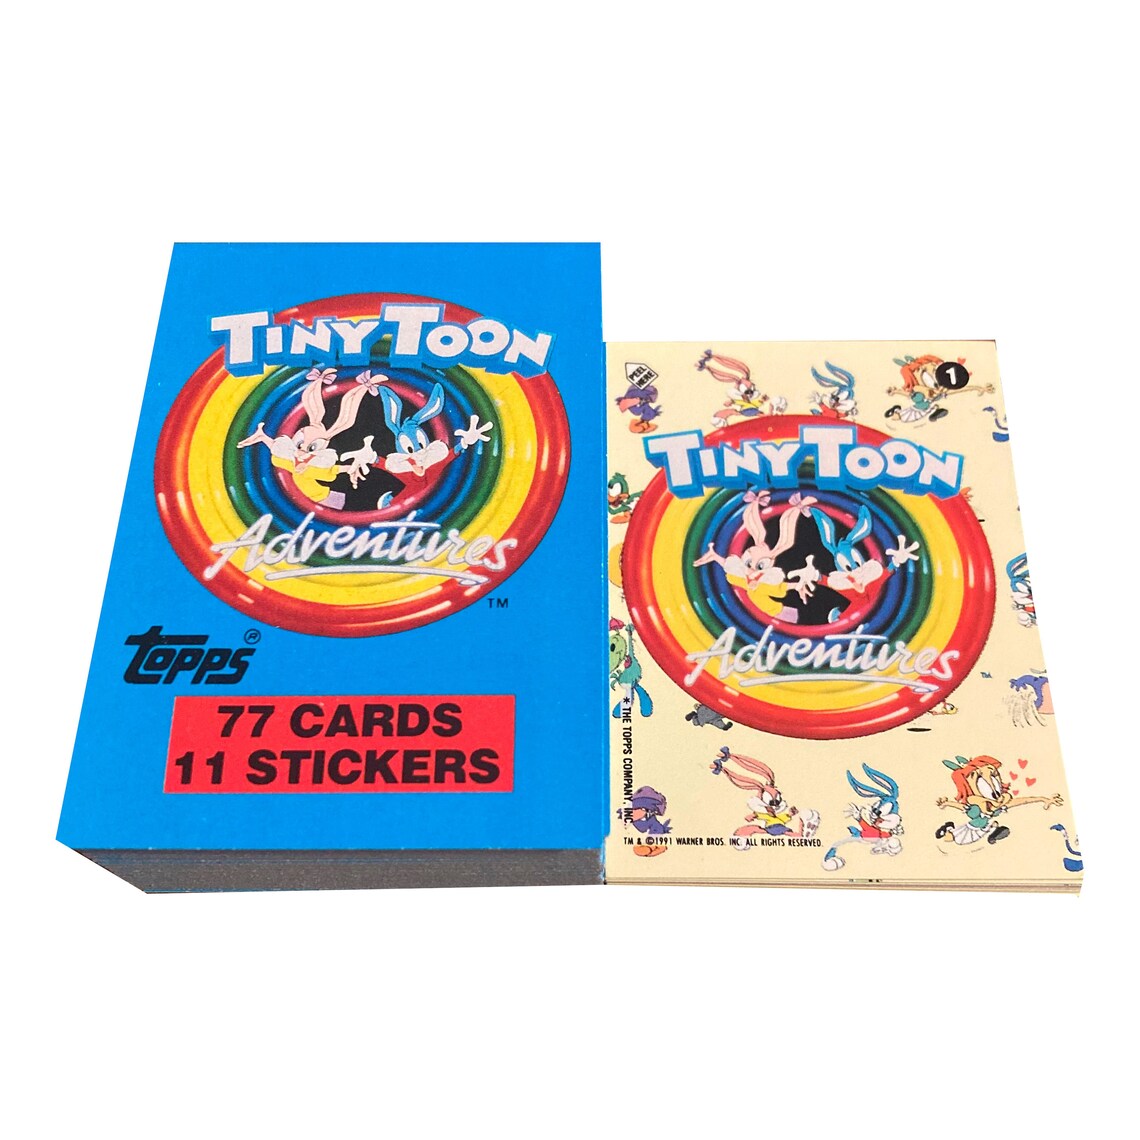 Topps Tiny Toon Adventures 88 Card Set (77 Base cards & 11 stickers)